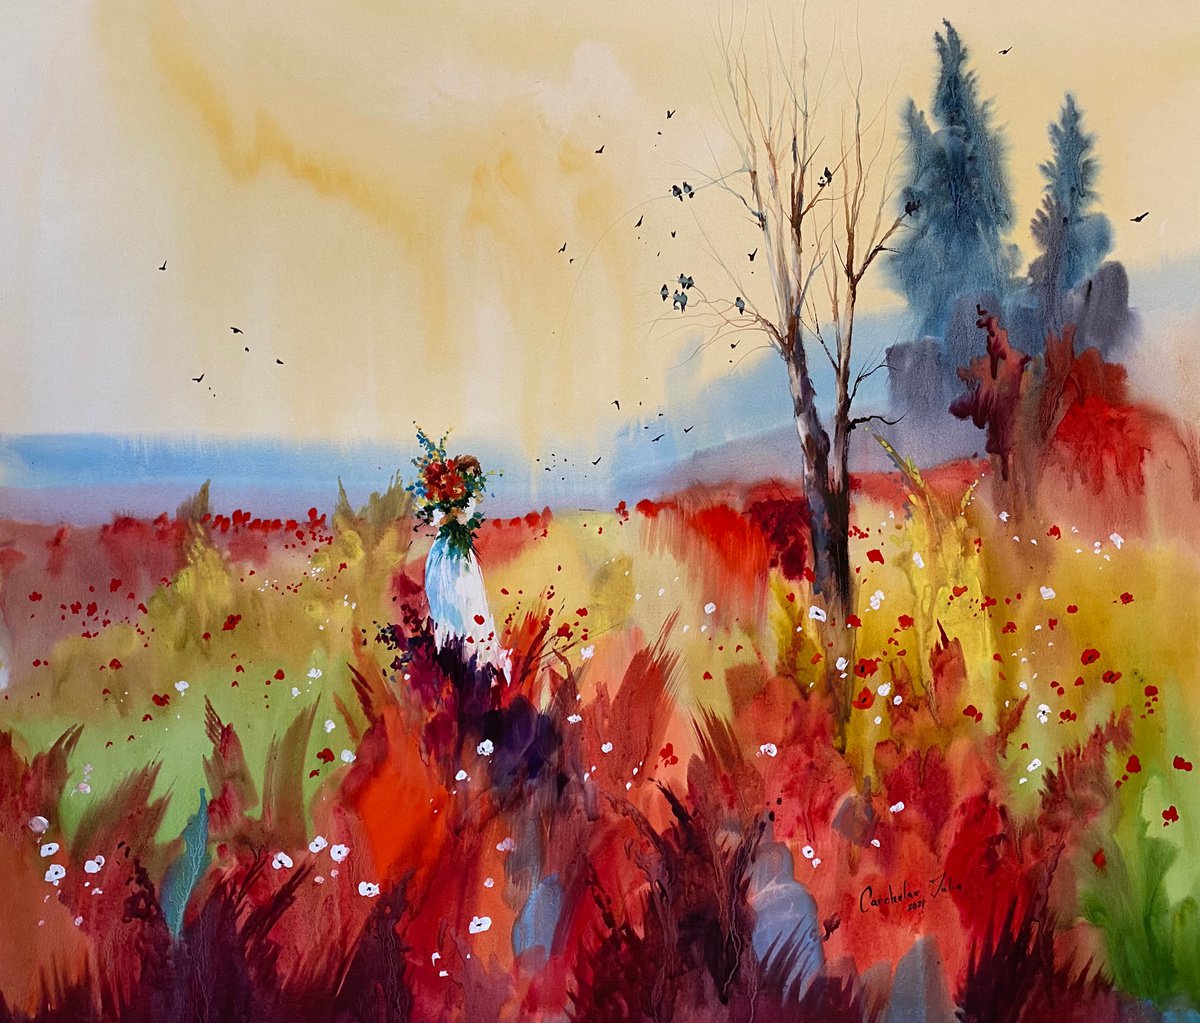 Watercolor "The endless beauty of nature" perfect gift by Iulia Carchelan